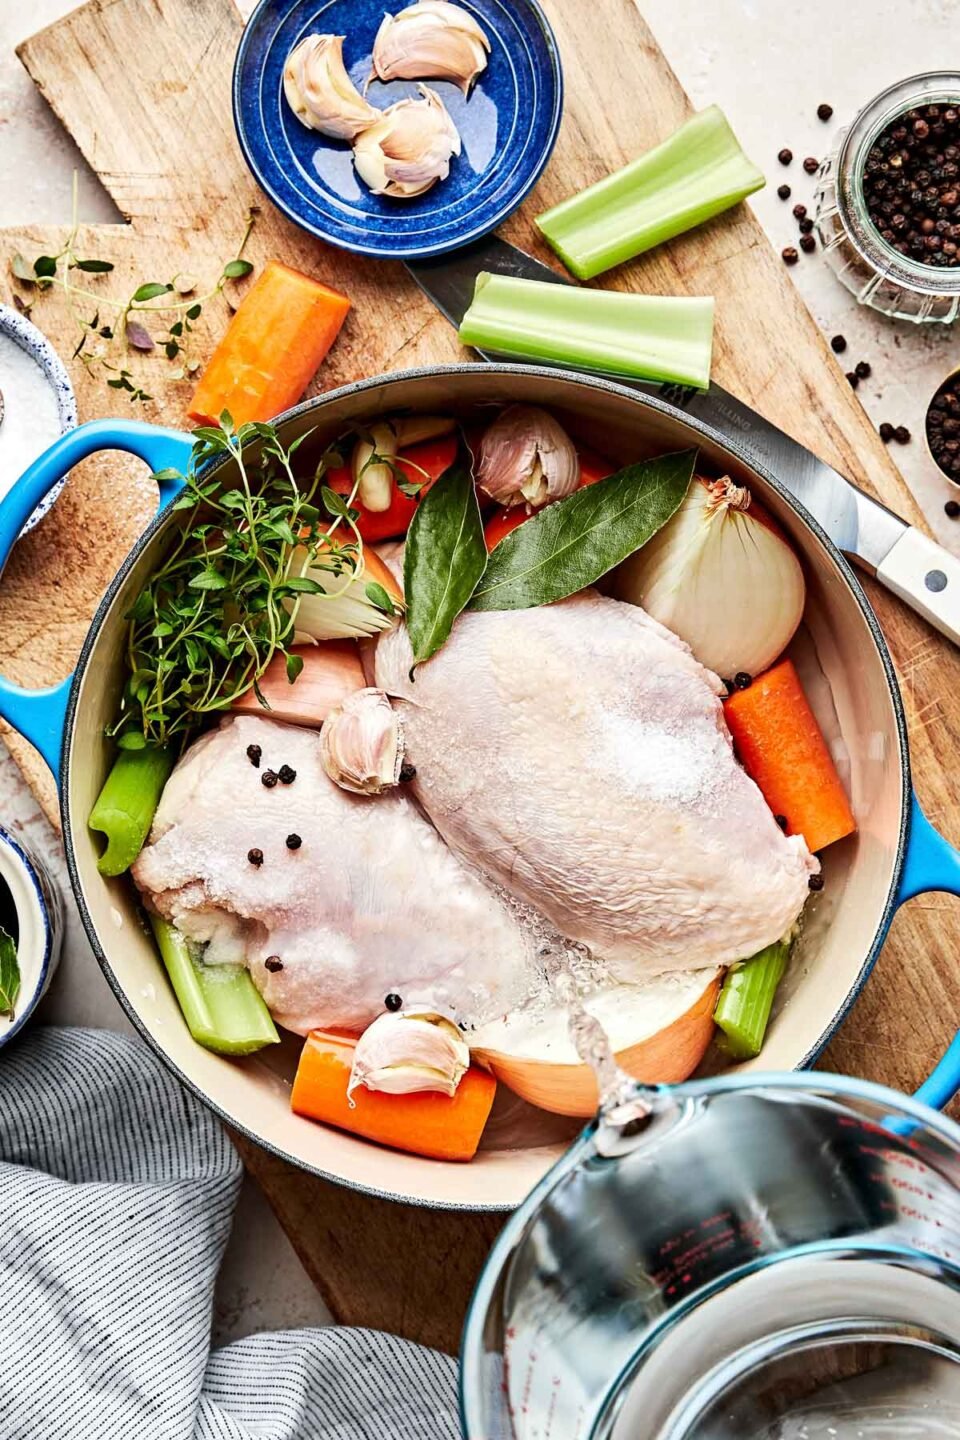 An overhead shot of ingredients to poach chicken in a large Dutch oven: raw chicken, carrots, celery, onion, peppercorns, fresh herbs, garlic and bay leaves. The Dutch oven sits atop a wooden board on an off-white surface. A glass measuring cup of water is being poured over the ingredients in the Dutch oven.